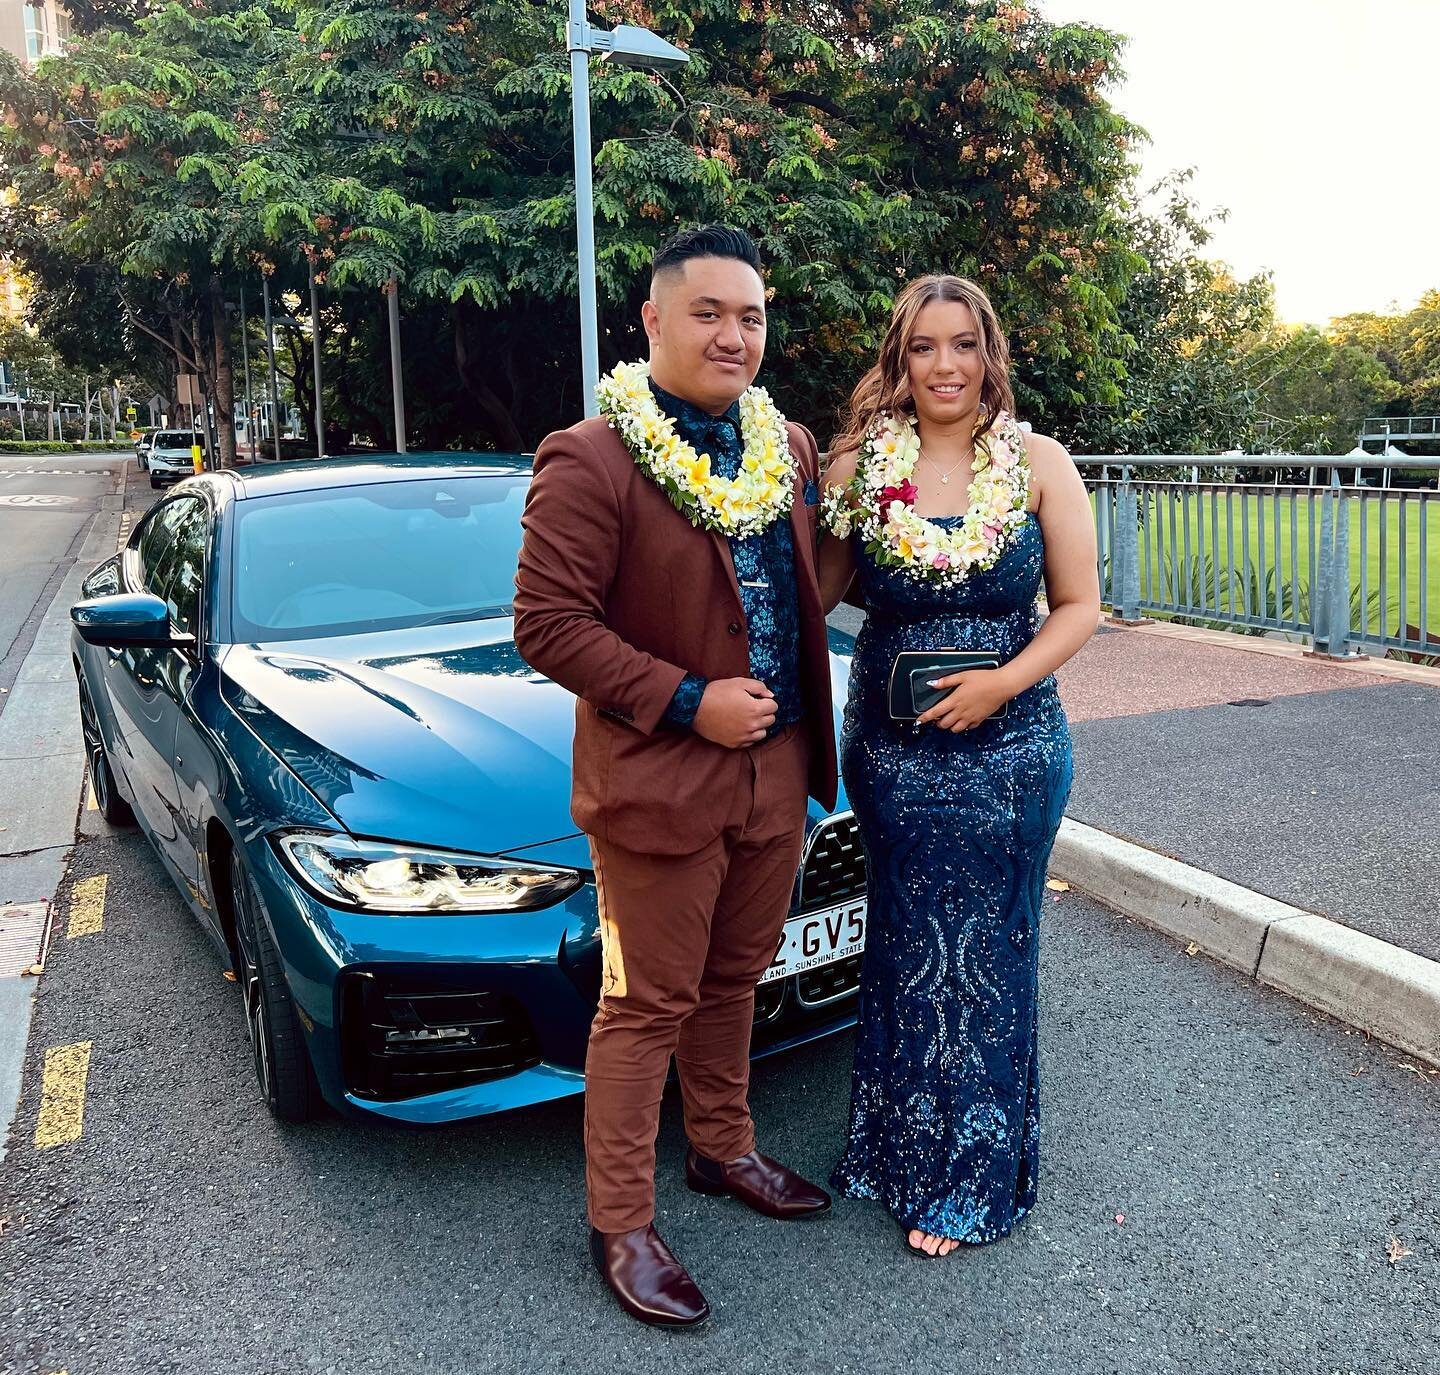 We hope you enjoyed your ride! Ft. our brand new #bmw420i 
.
.
.
.
.
.
.
.
.
.
#exoticcartravels #ect #schoolformal #brisbane #luxurycarhire #exoticcarhire #brisbane #brisbanecity